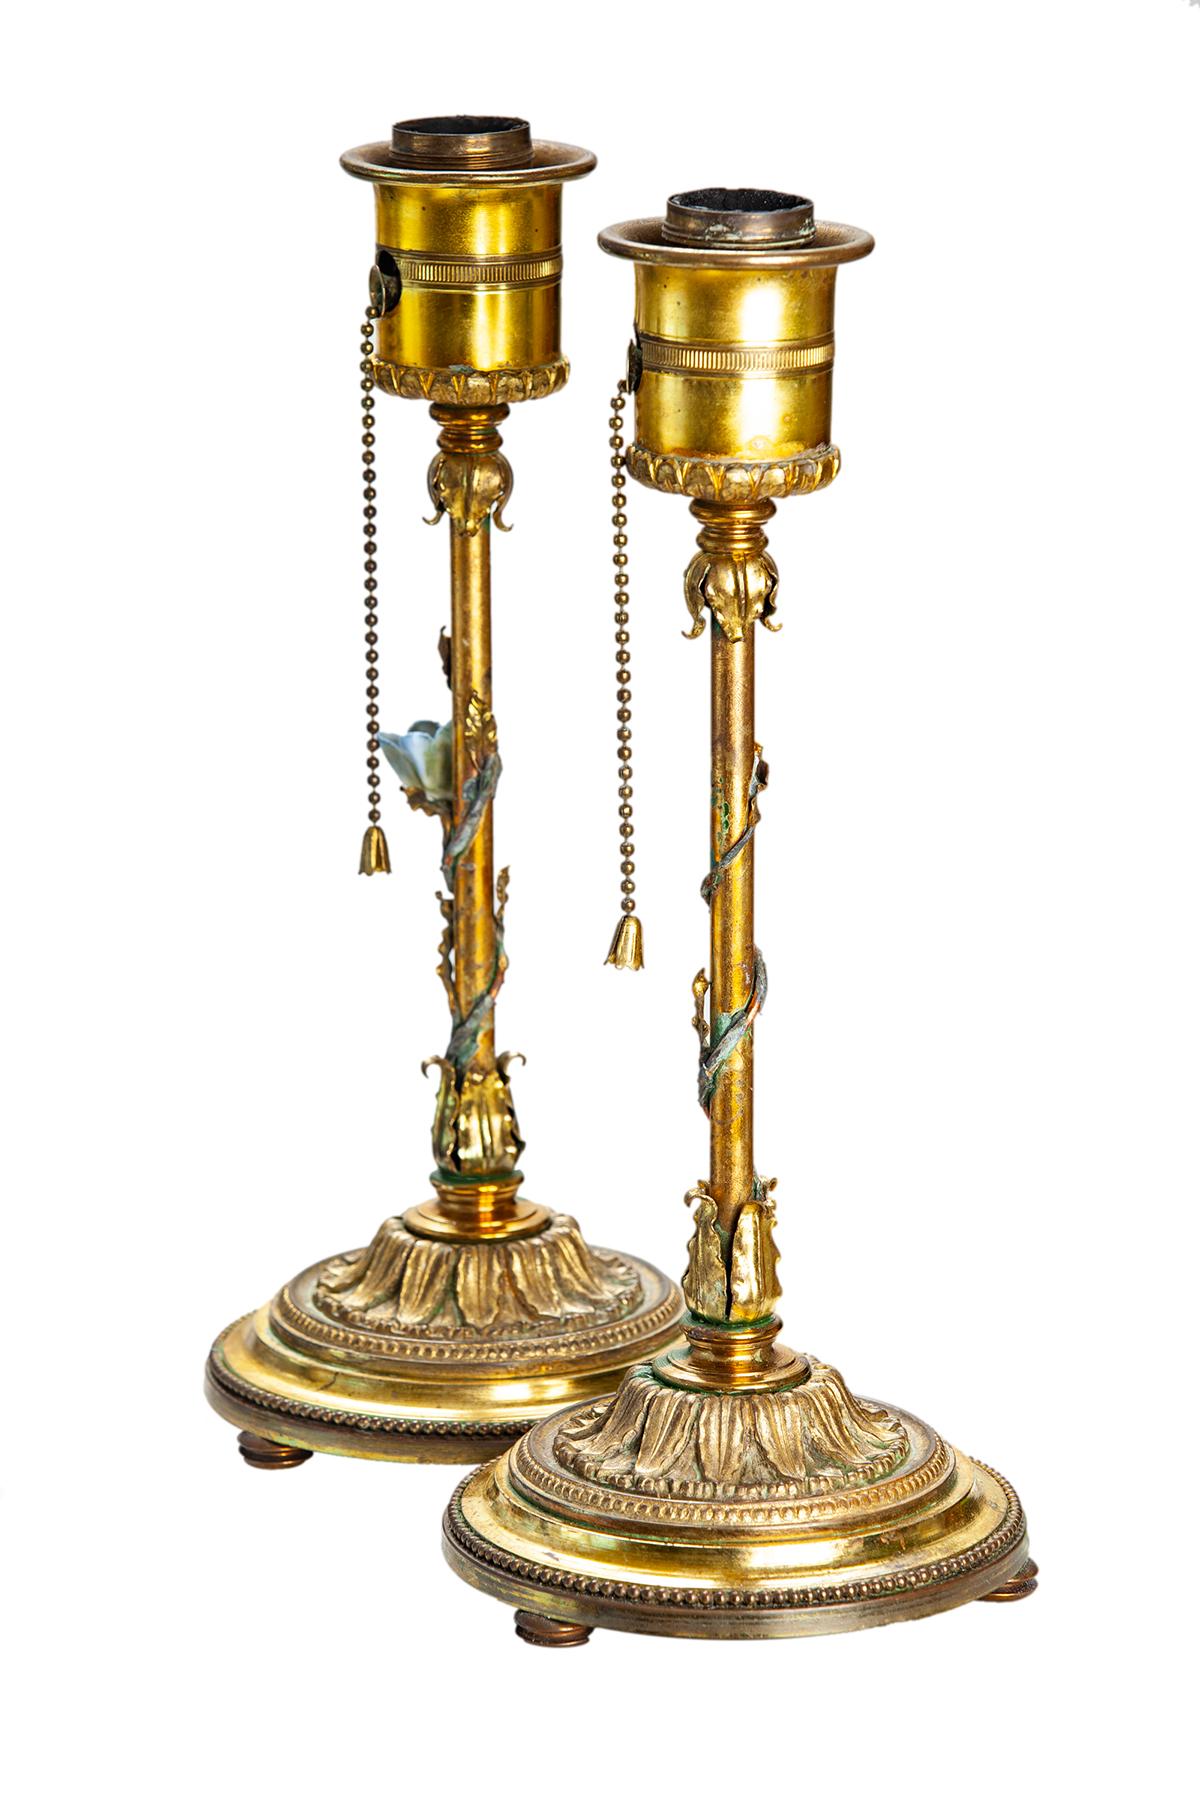 Romantic German Brass Candlestick Lamps w Vines & Vintage Stenciled Shade, a Pair For Sale